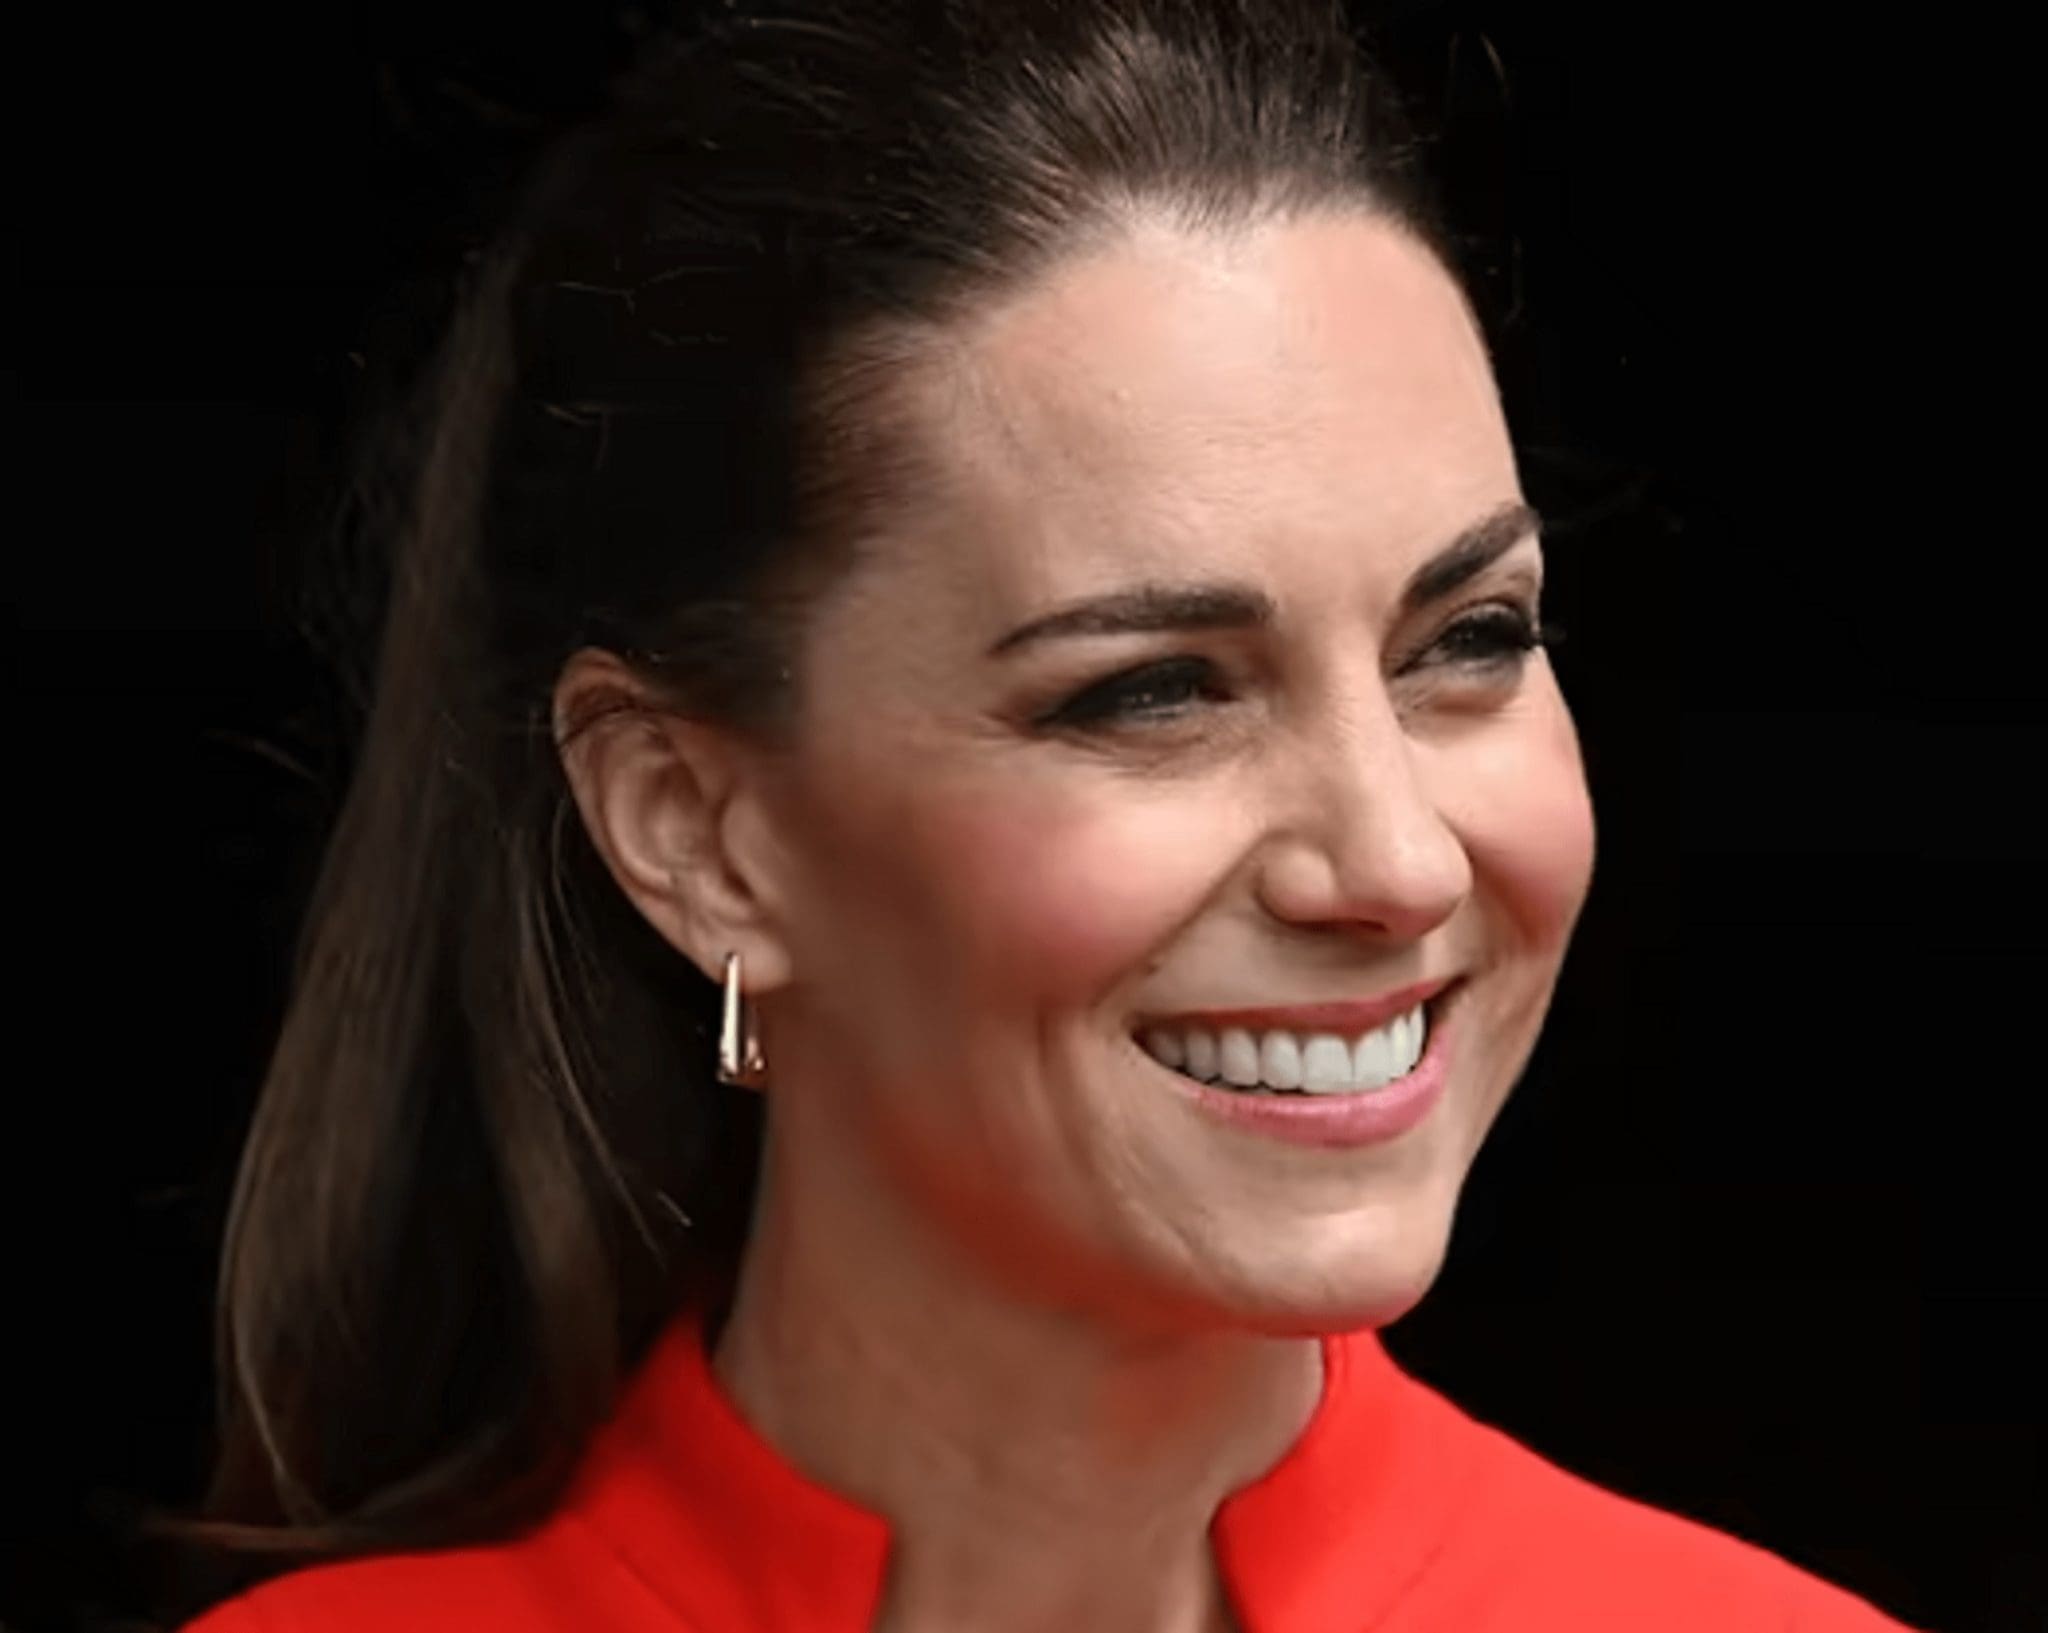 Kate Middleton spoke touchingly about Hospices